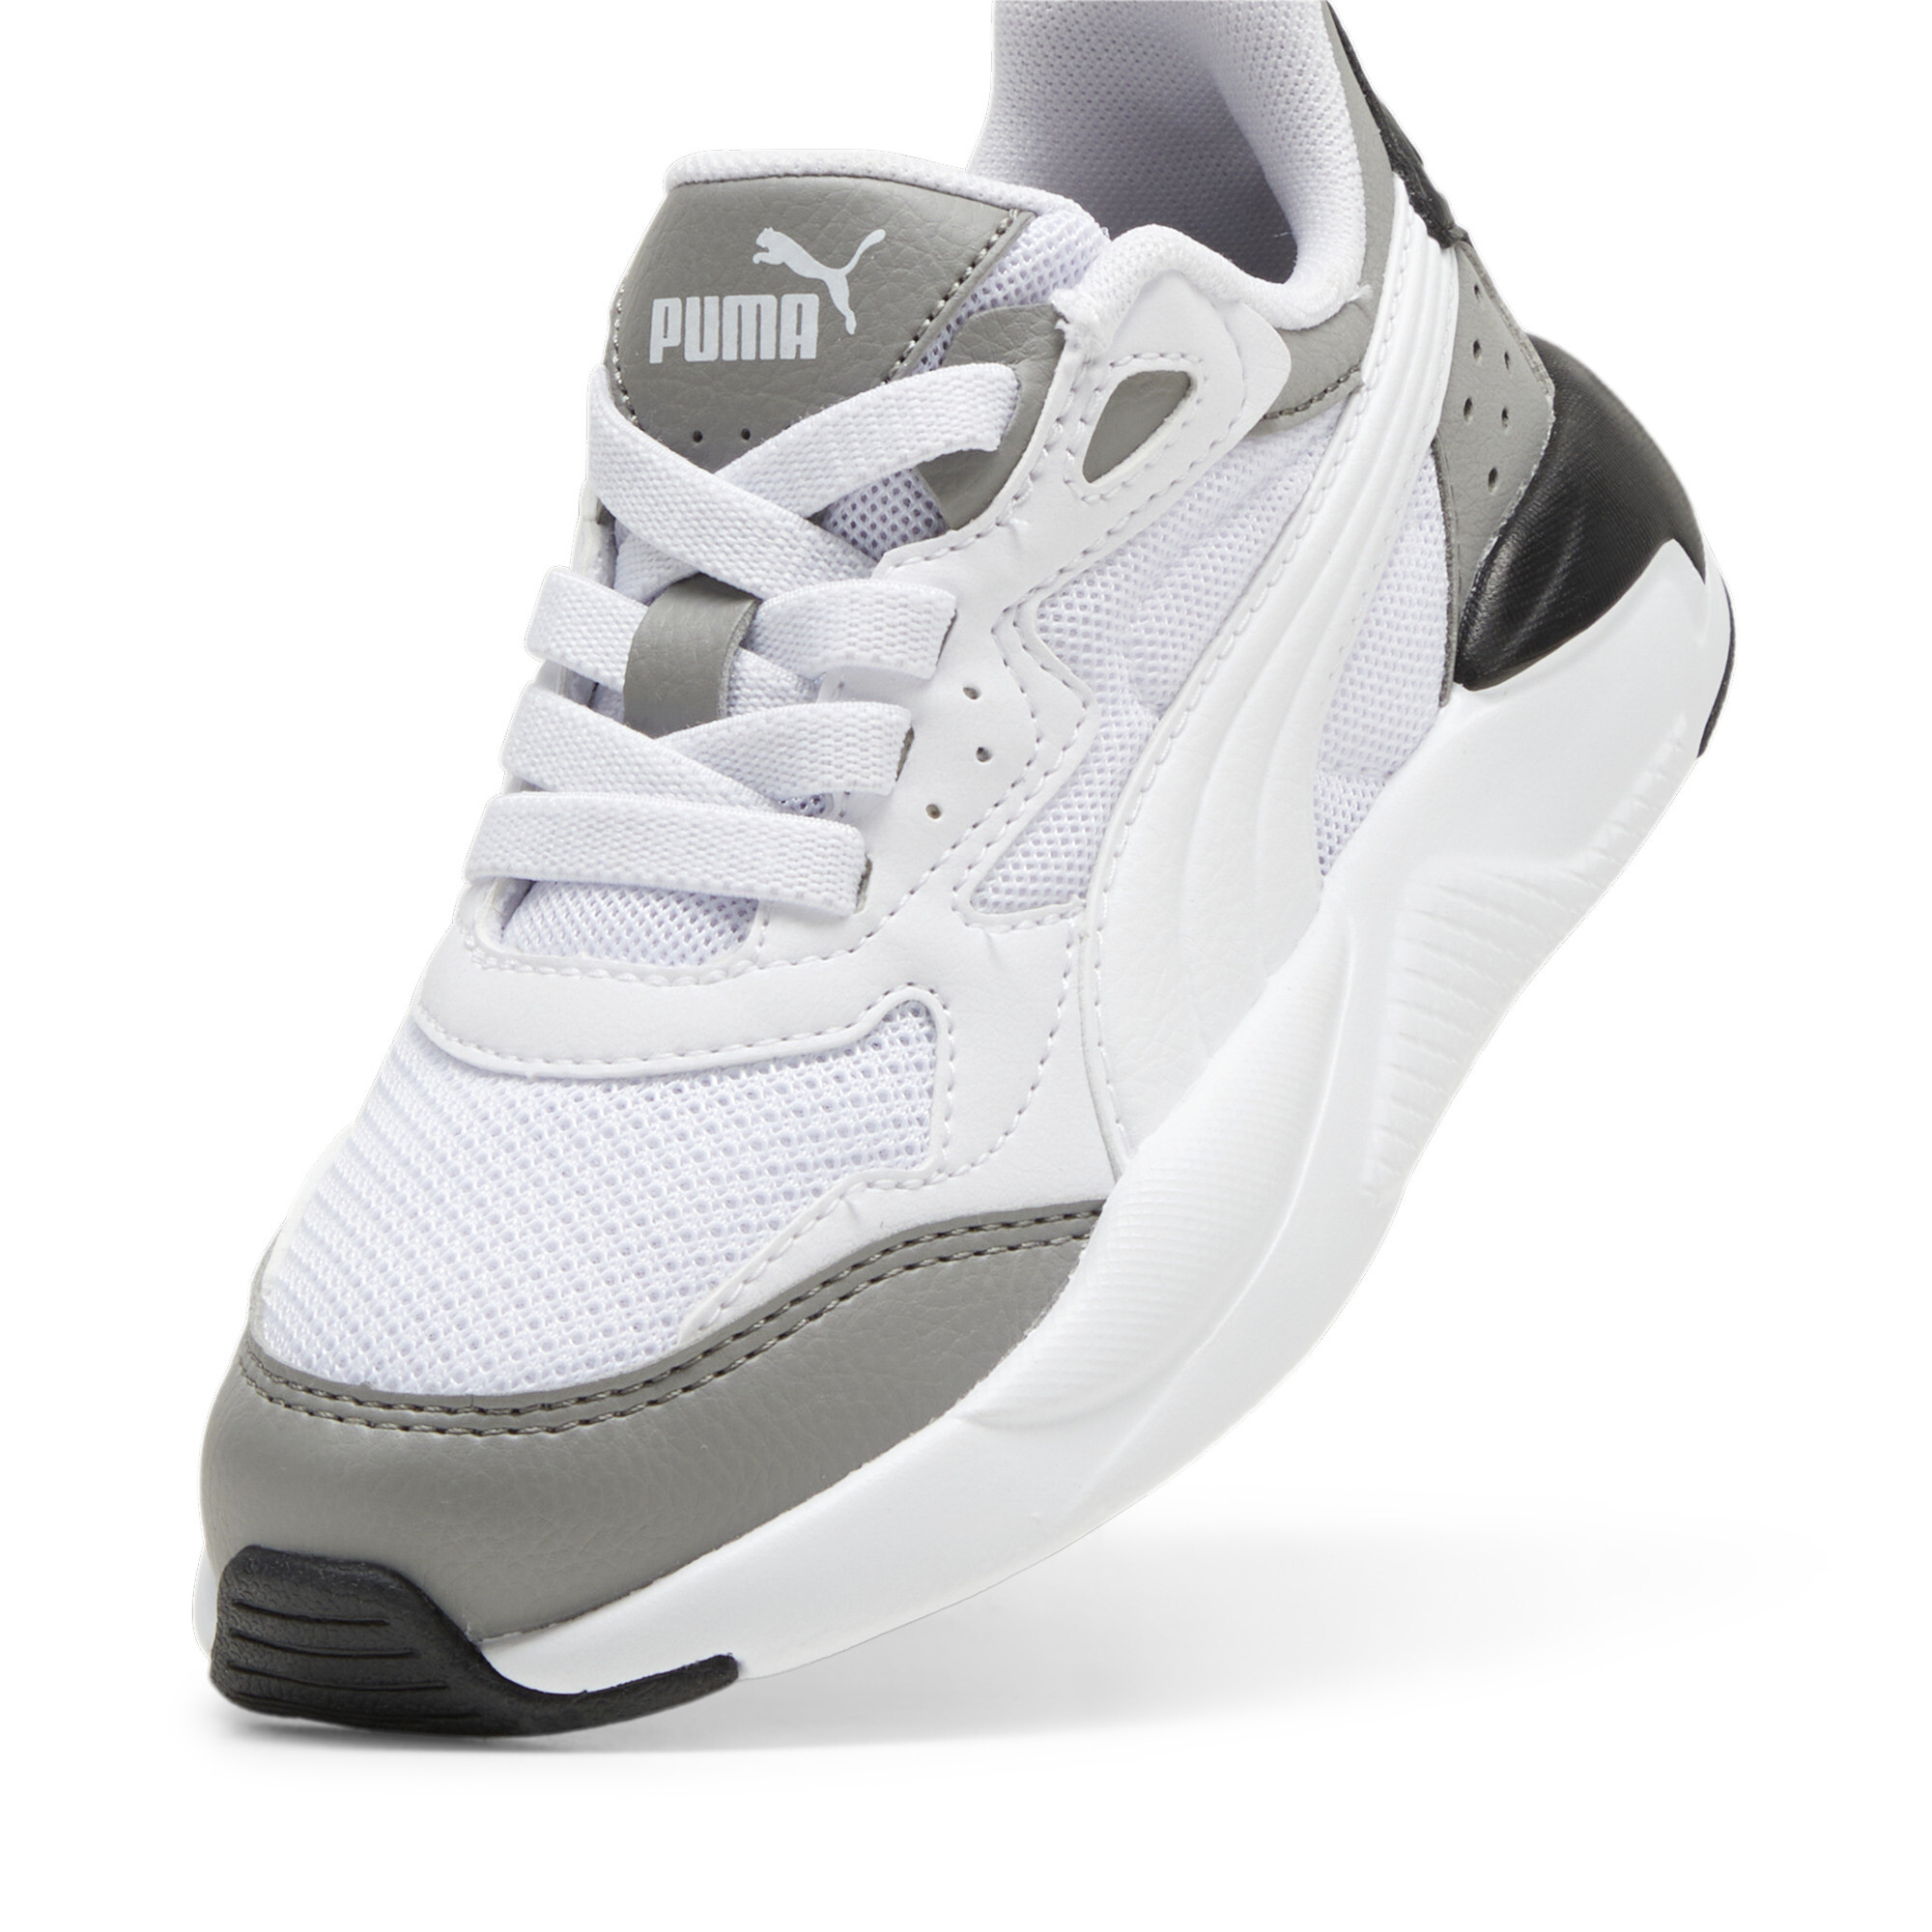 Puma X-Ray Speed AC Kids' Trainers, Gray, Size 31.5, Shoes